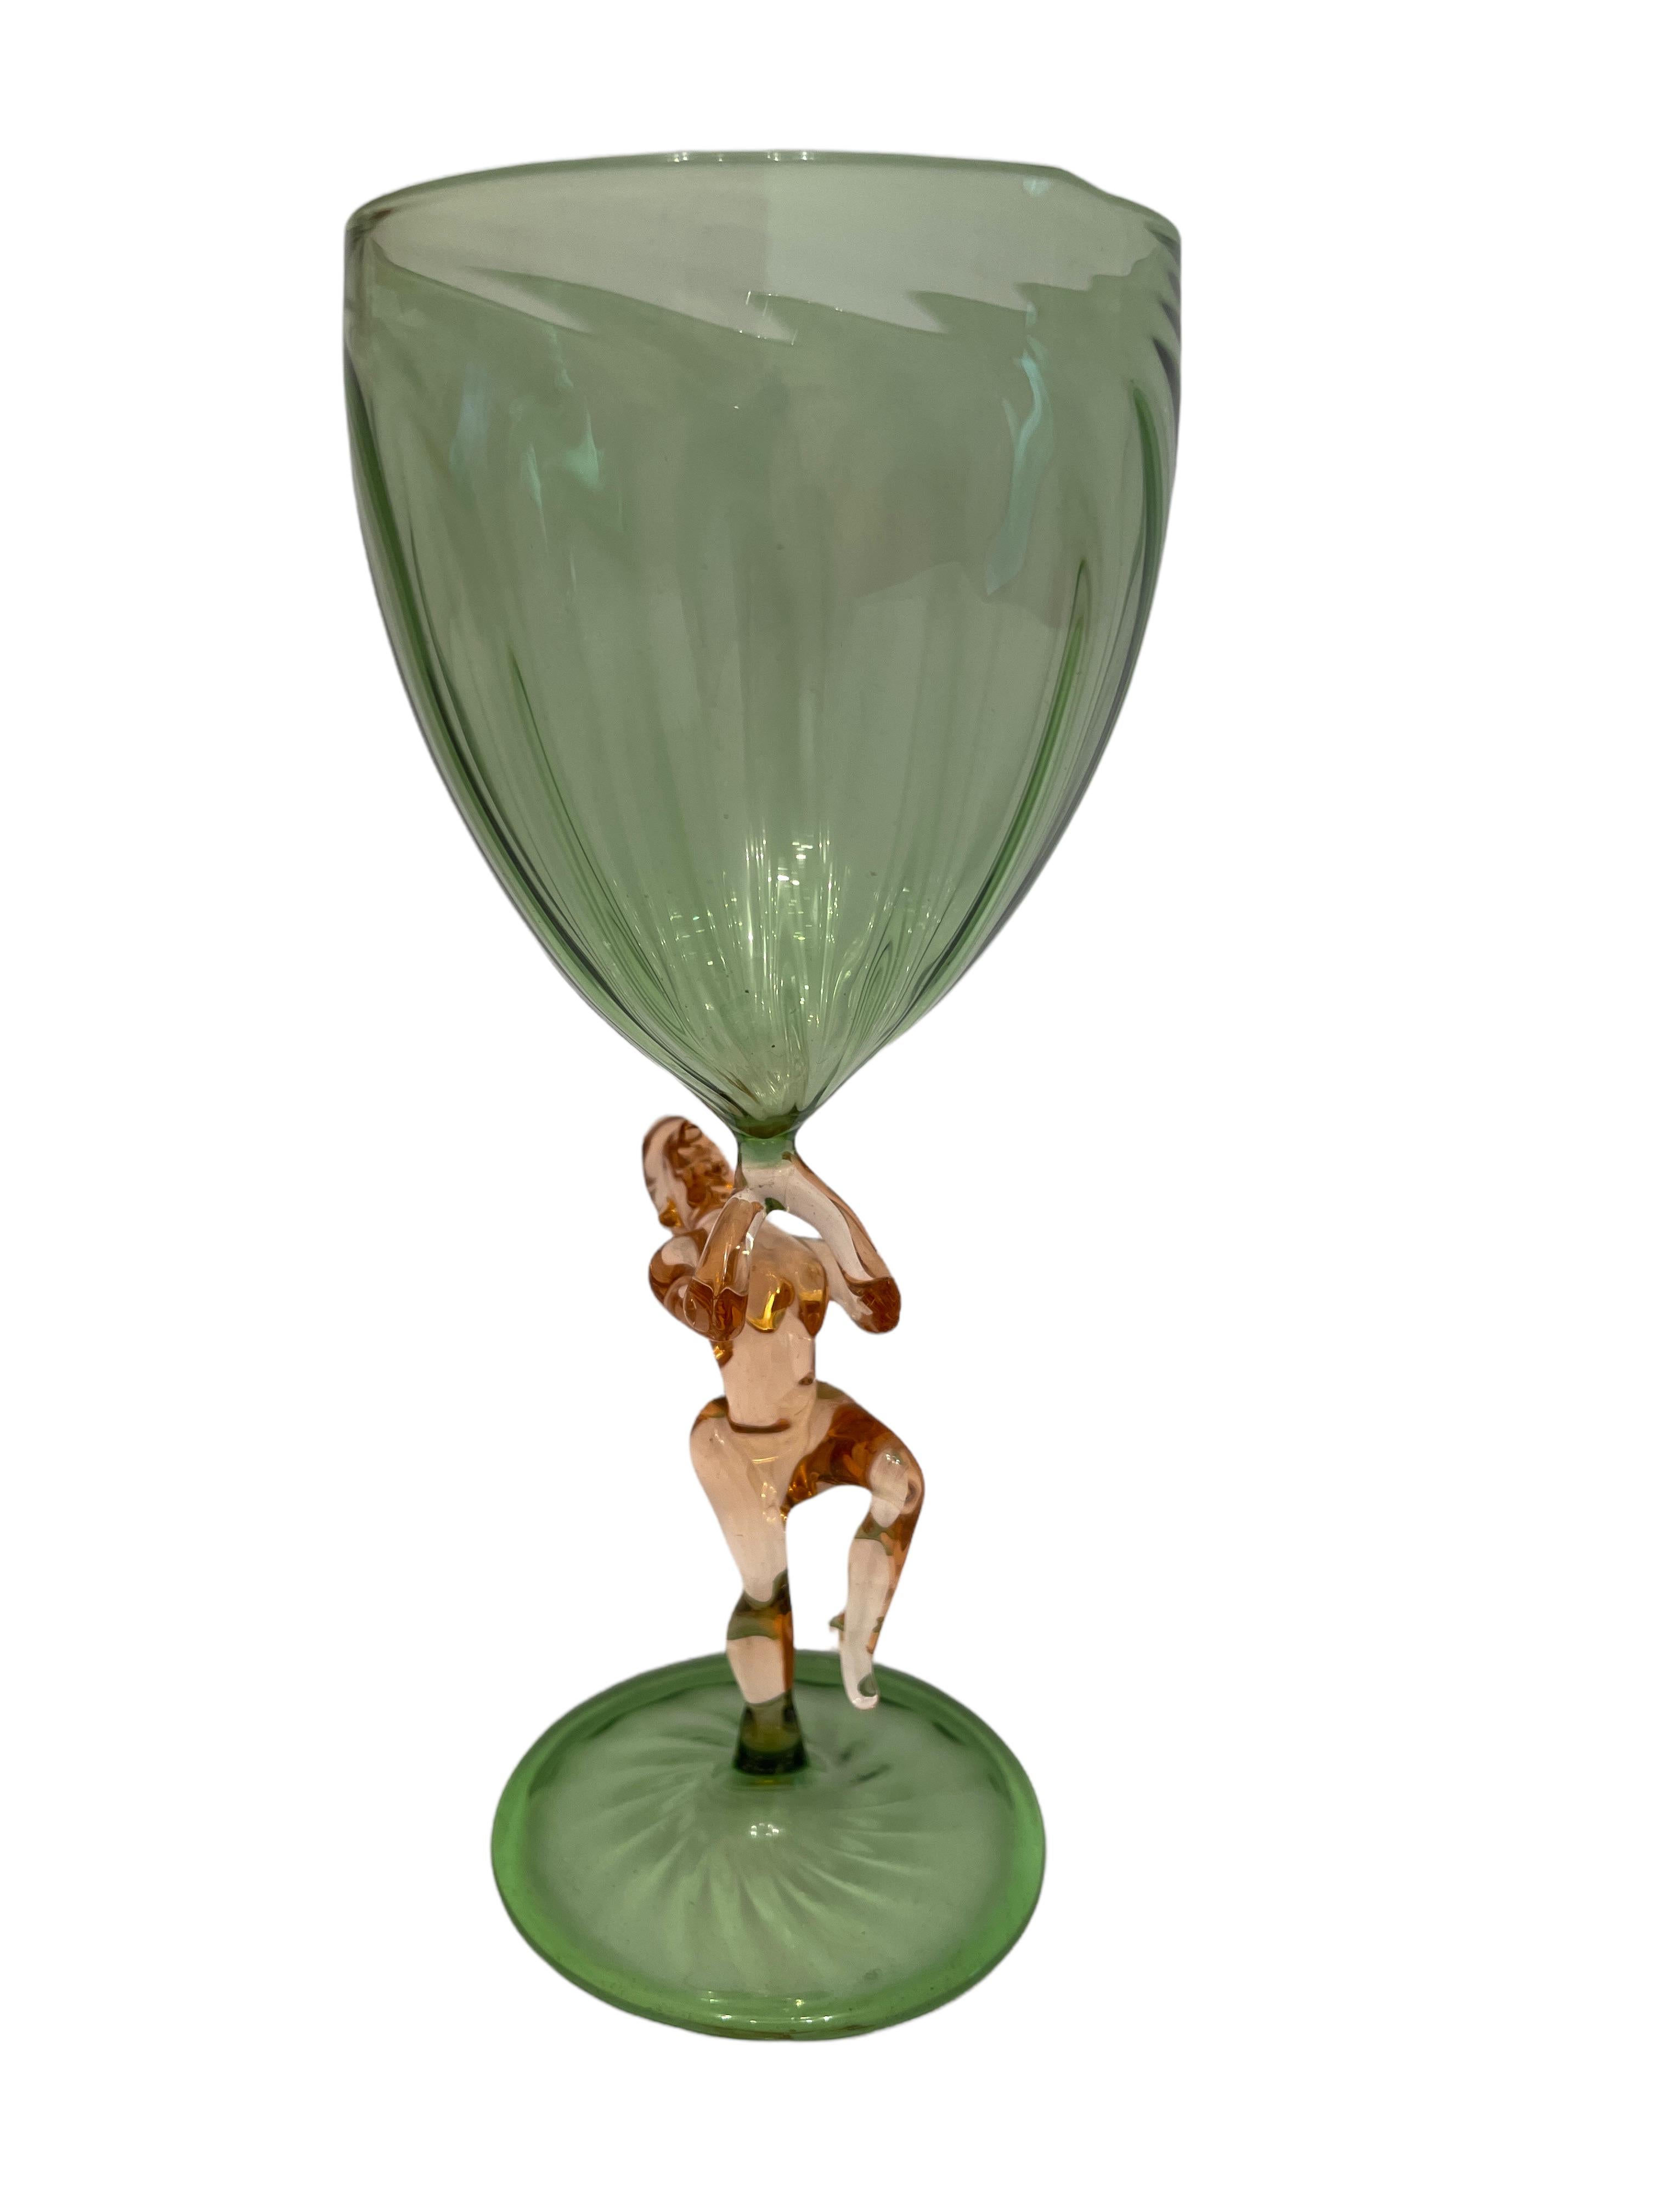 A single beautiful glass with a nude lady as stem, made in Austria. Very good vintage condition, consistent with age and use. A nice addition to any table, bar or just to display in your collection.